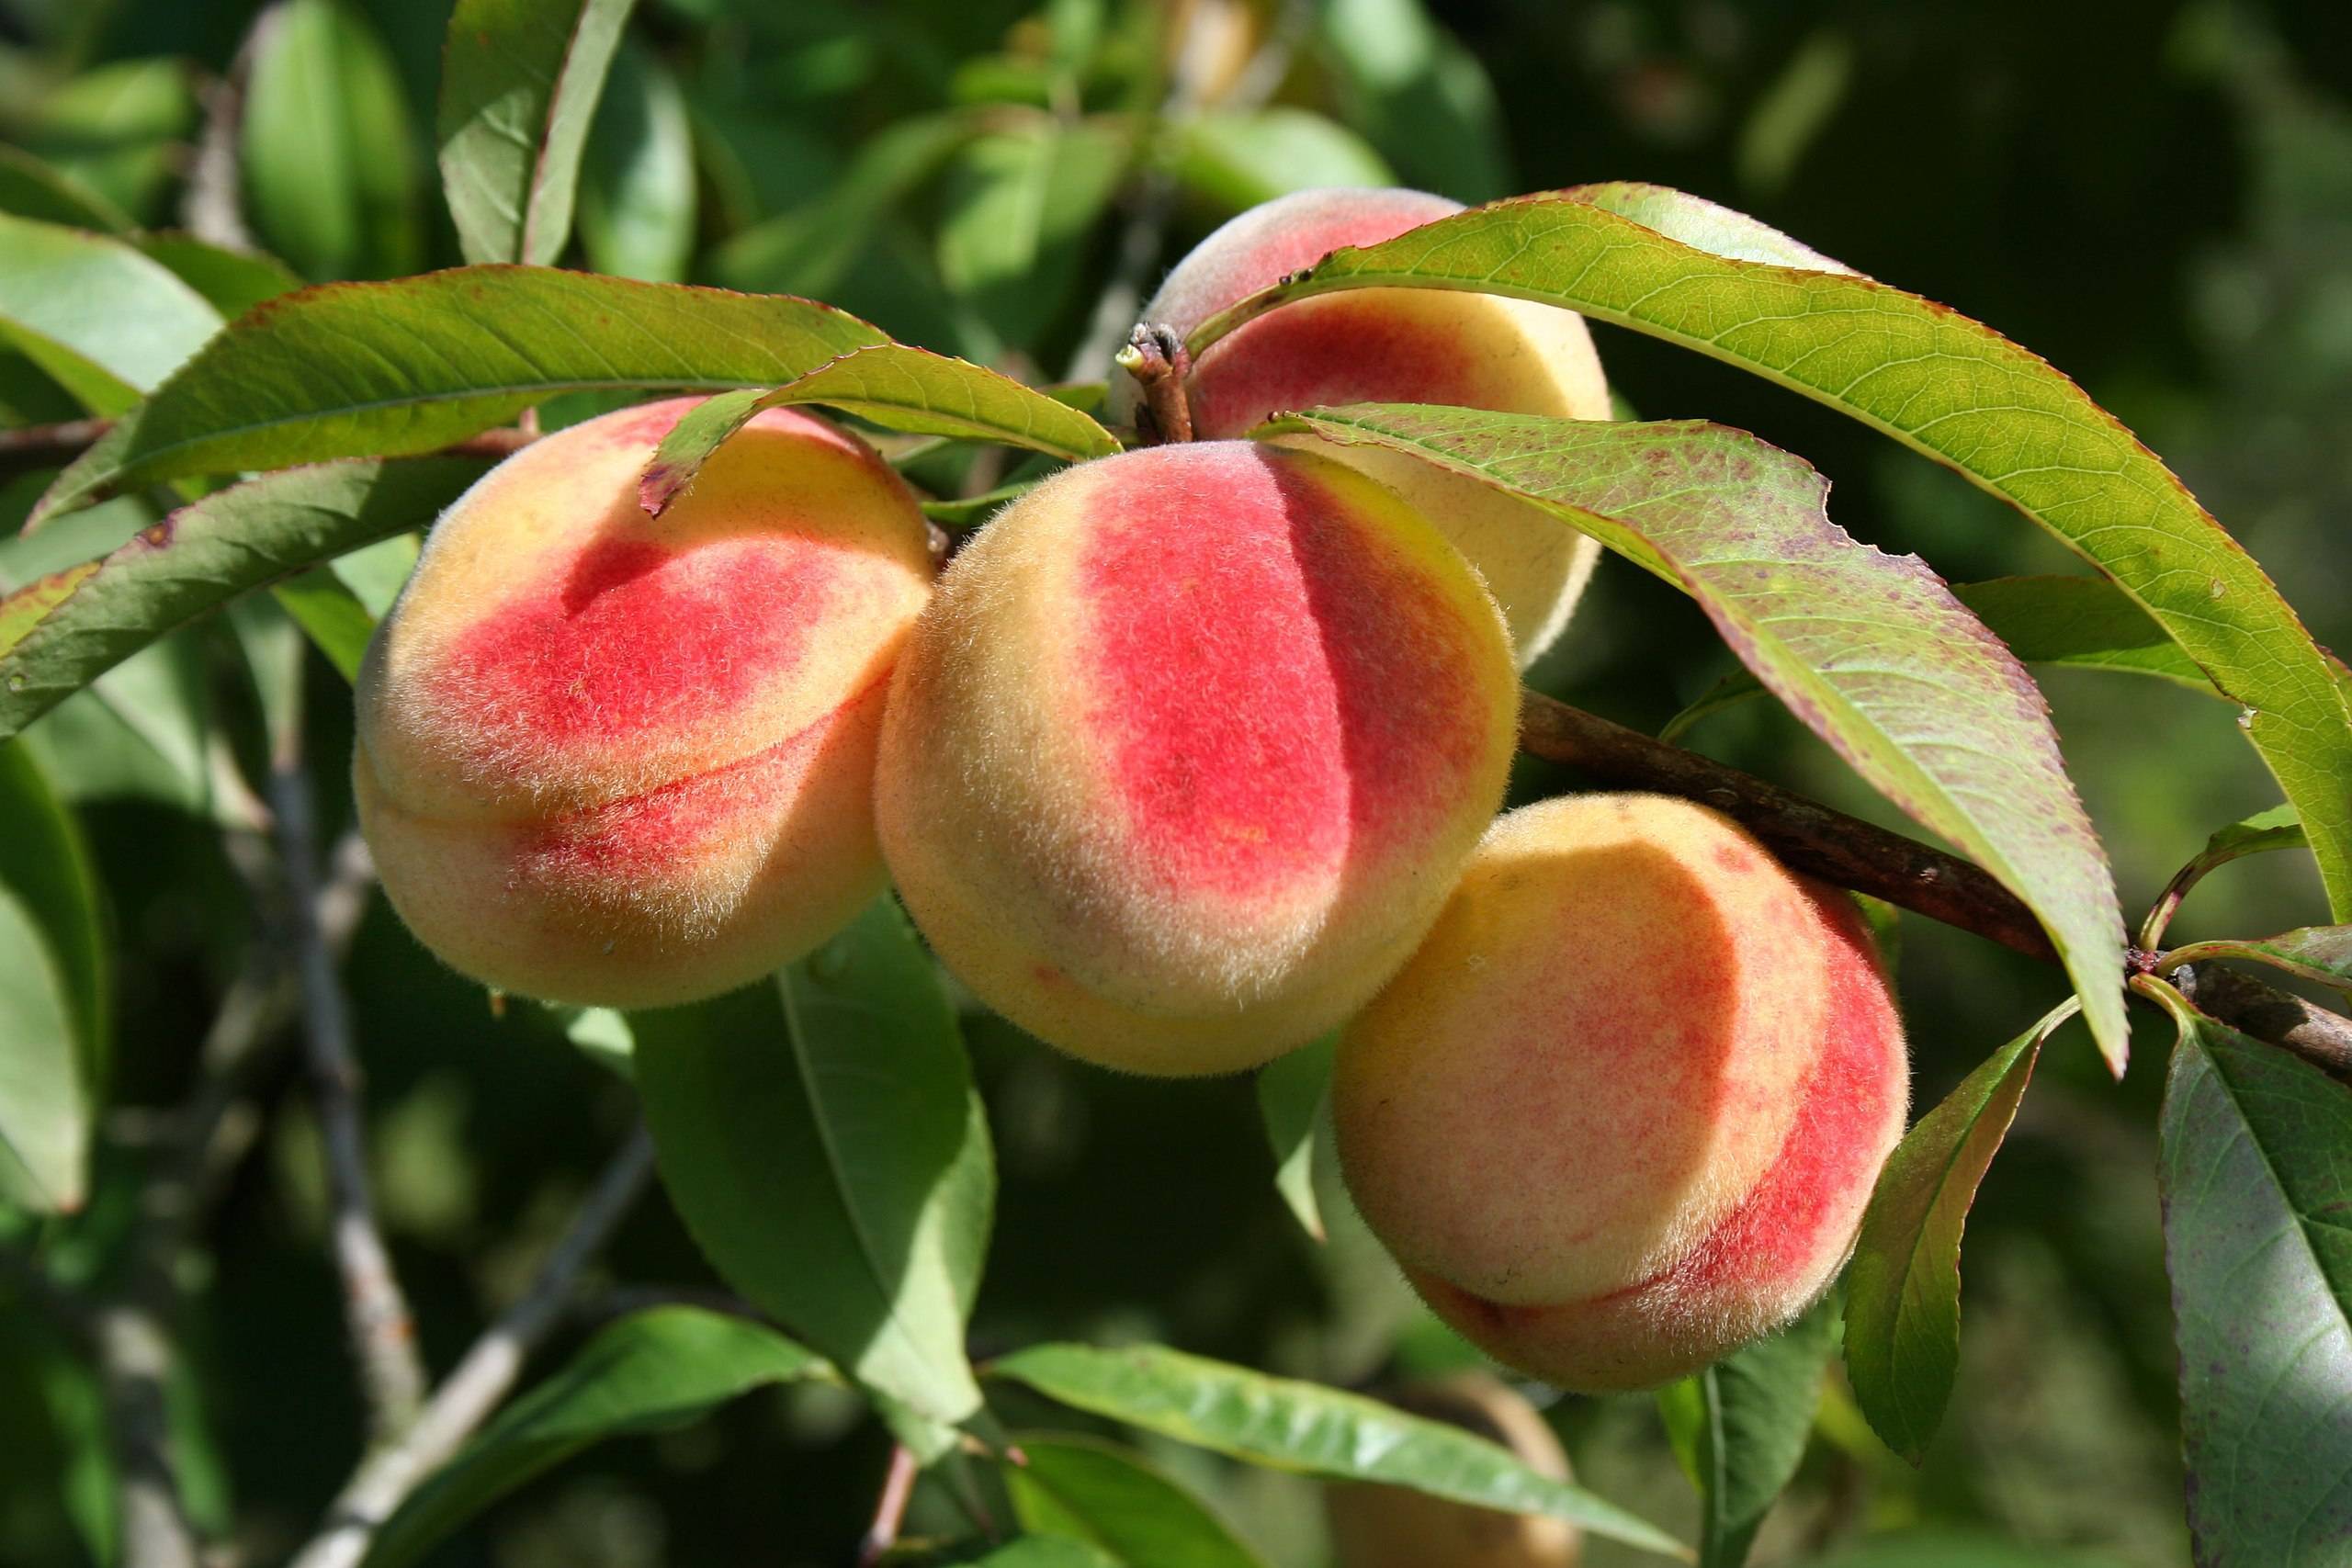 peach-red fruits with green leaves and beige stems